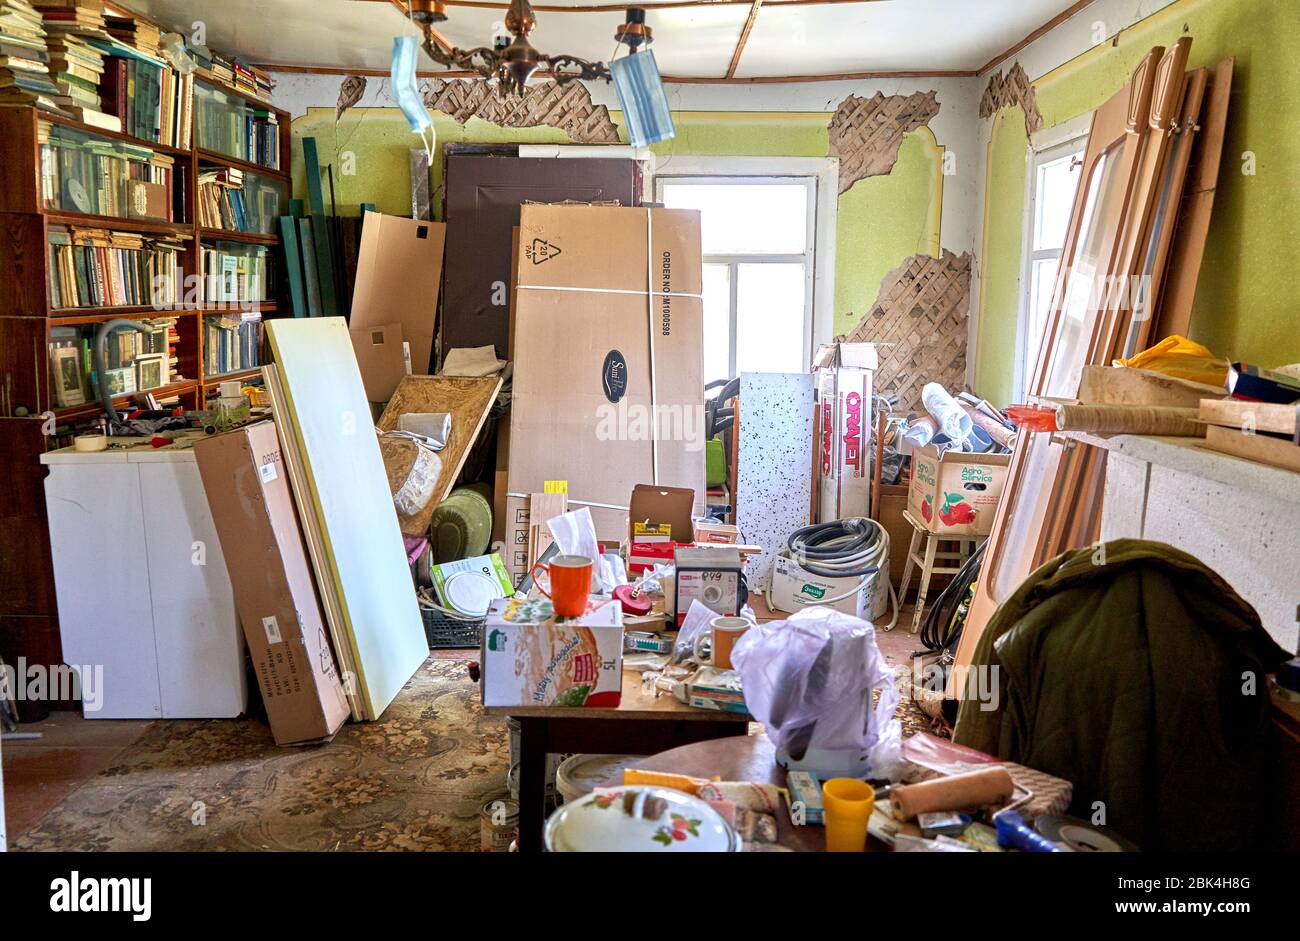 Room in old house full of stuff Stock Photo - Alamy